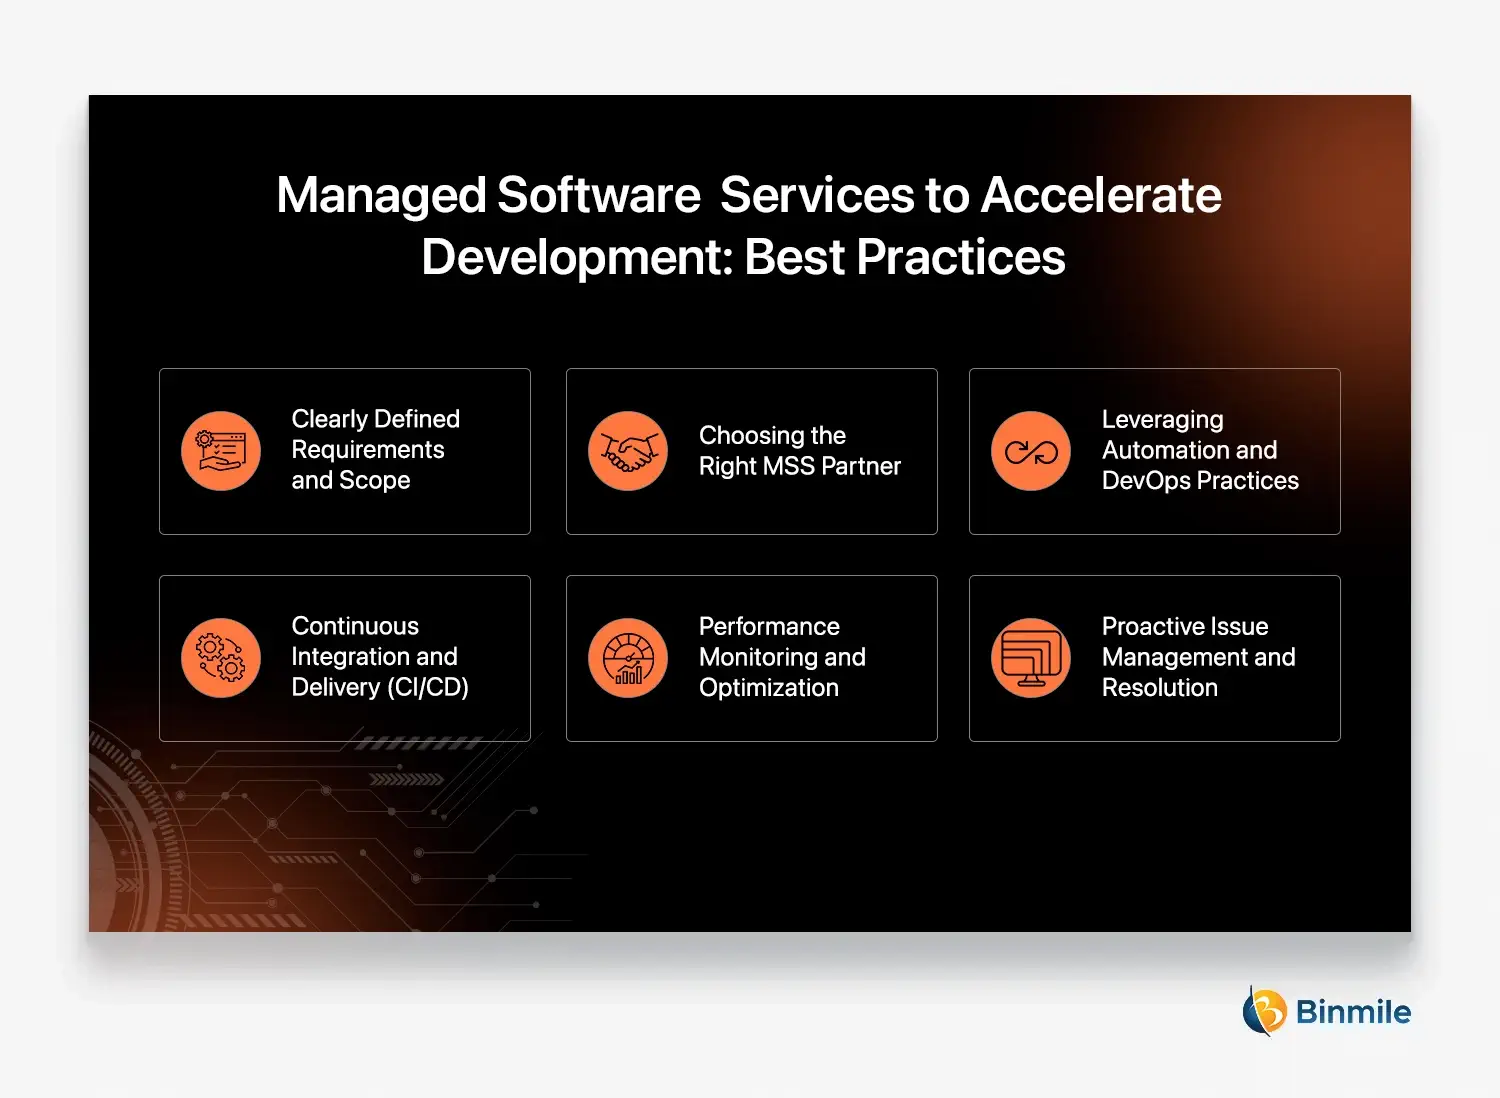 Best Practice for Managed Software Services | Binmile